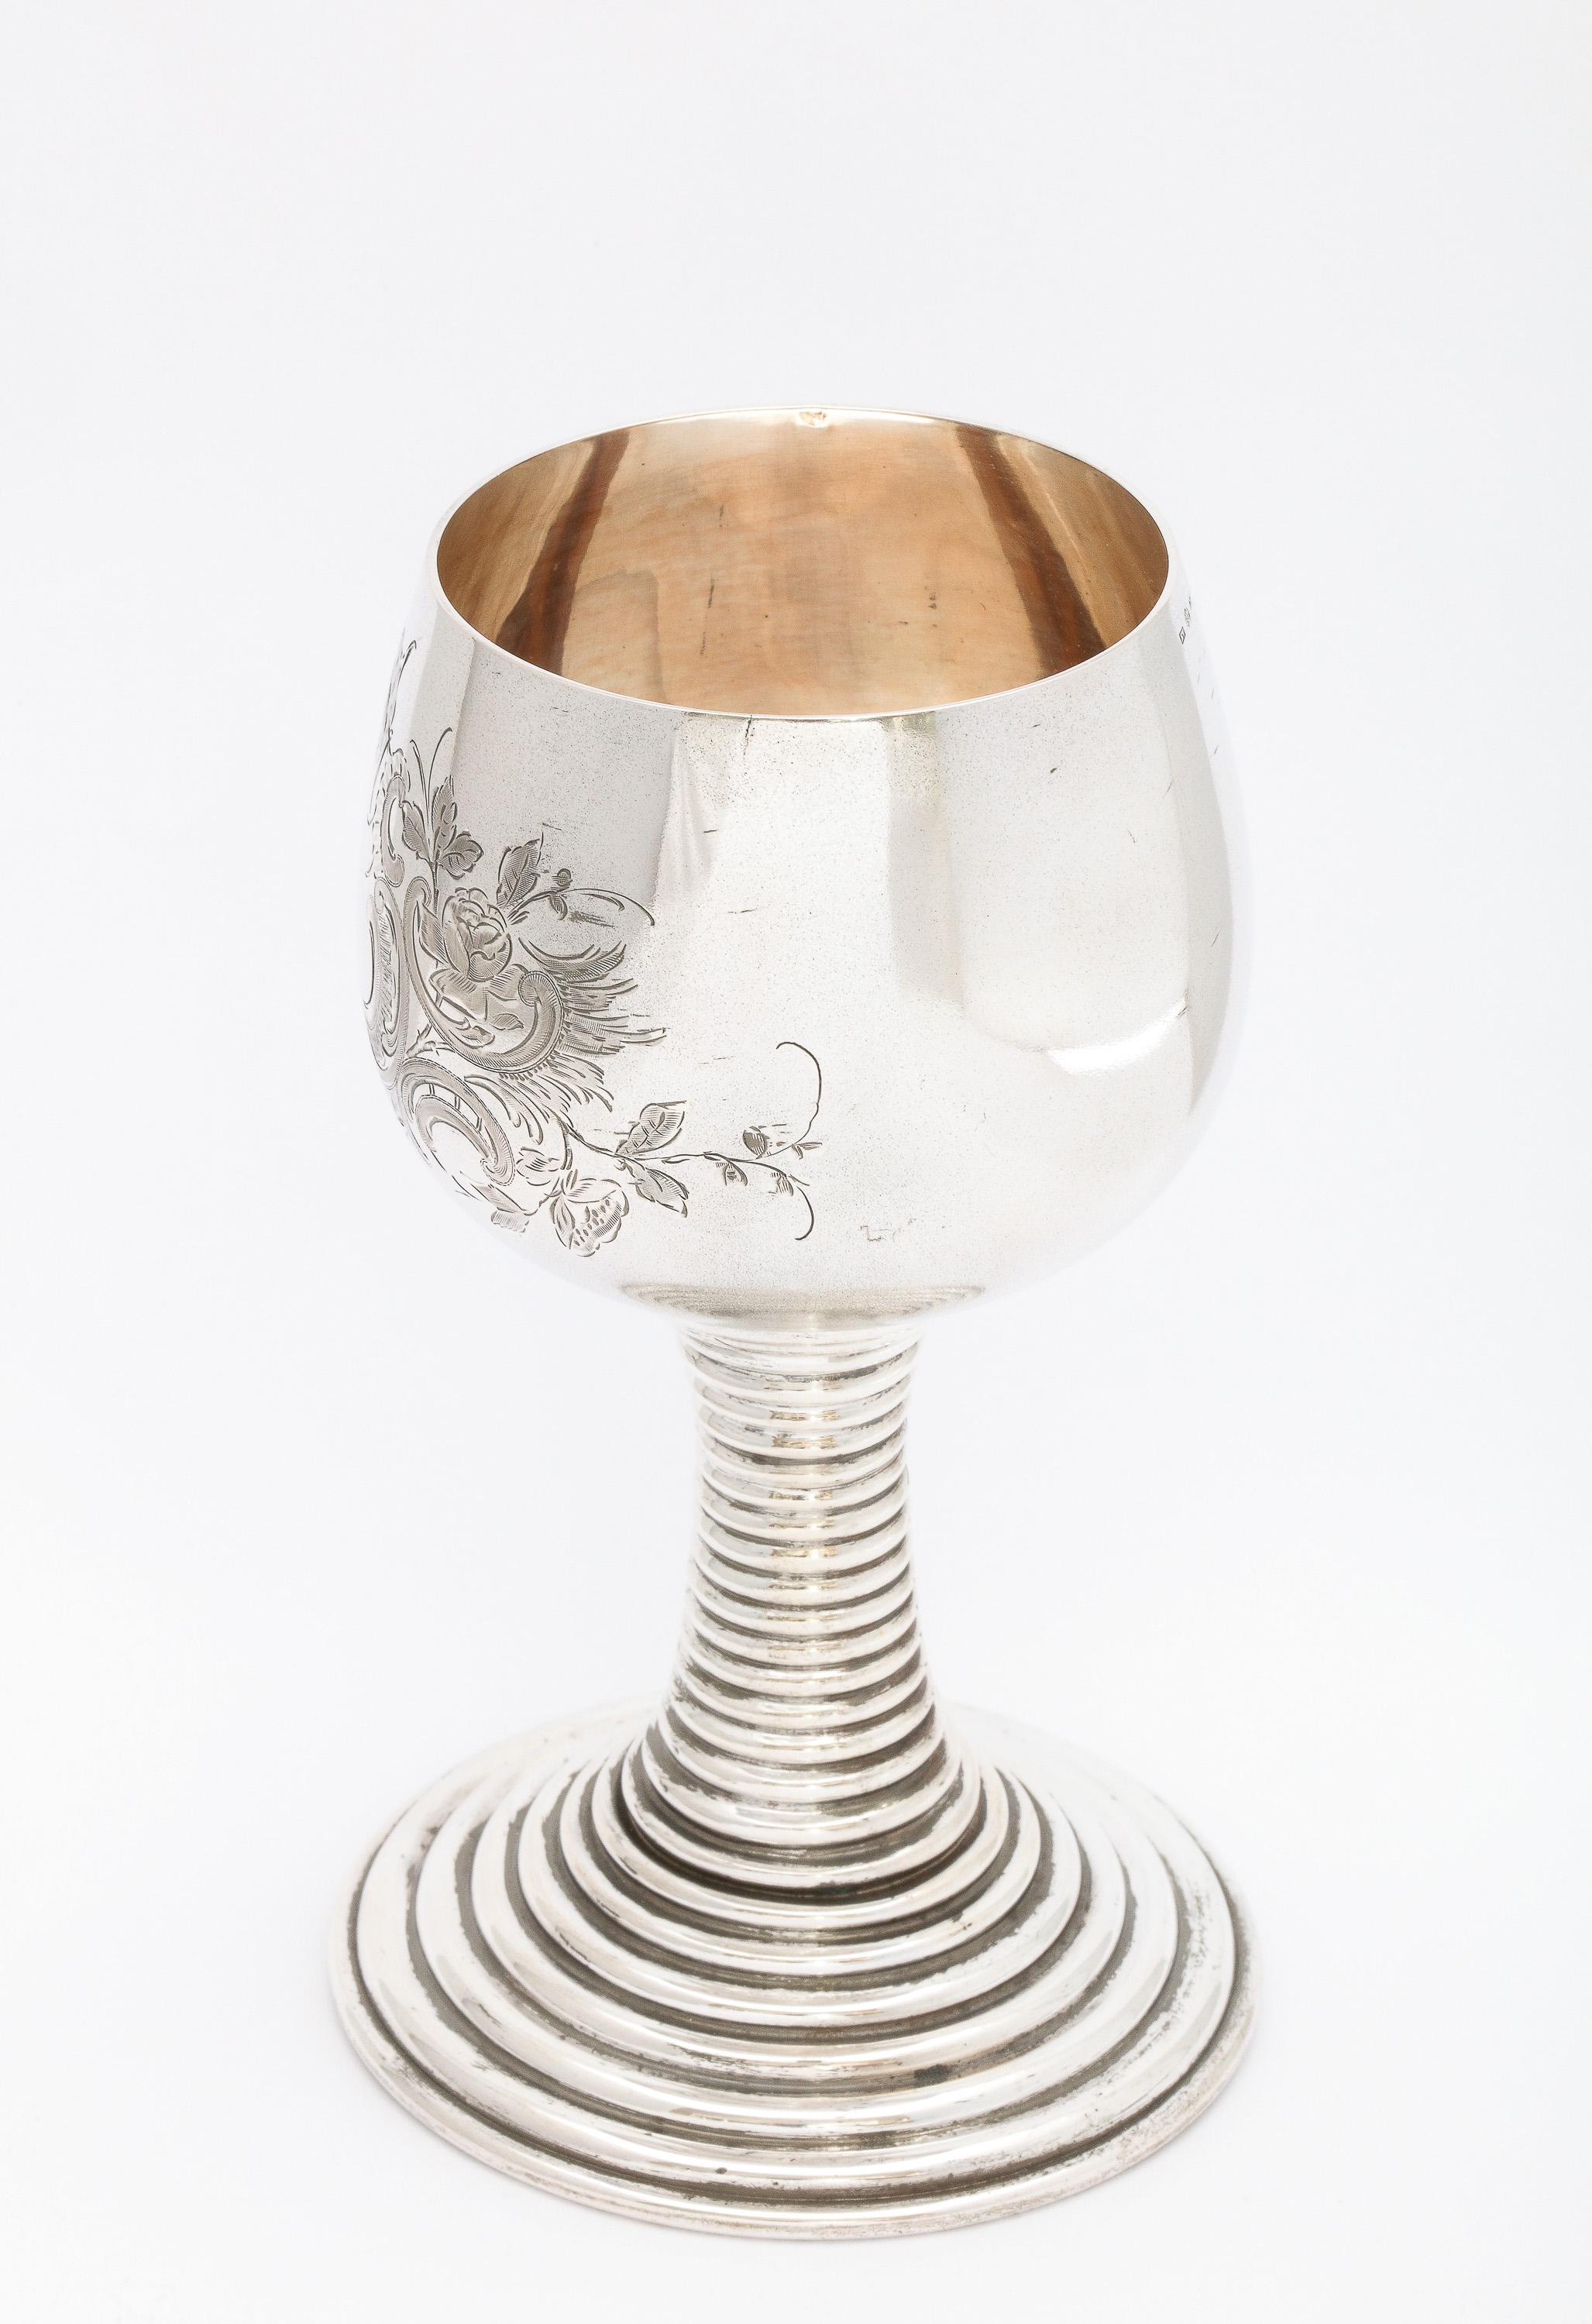 Medieval/15th Century-Style Continental Silver '.800' Roemer/ Rummer Goblet For Sale 3